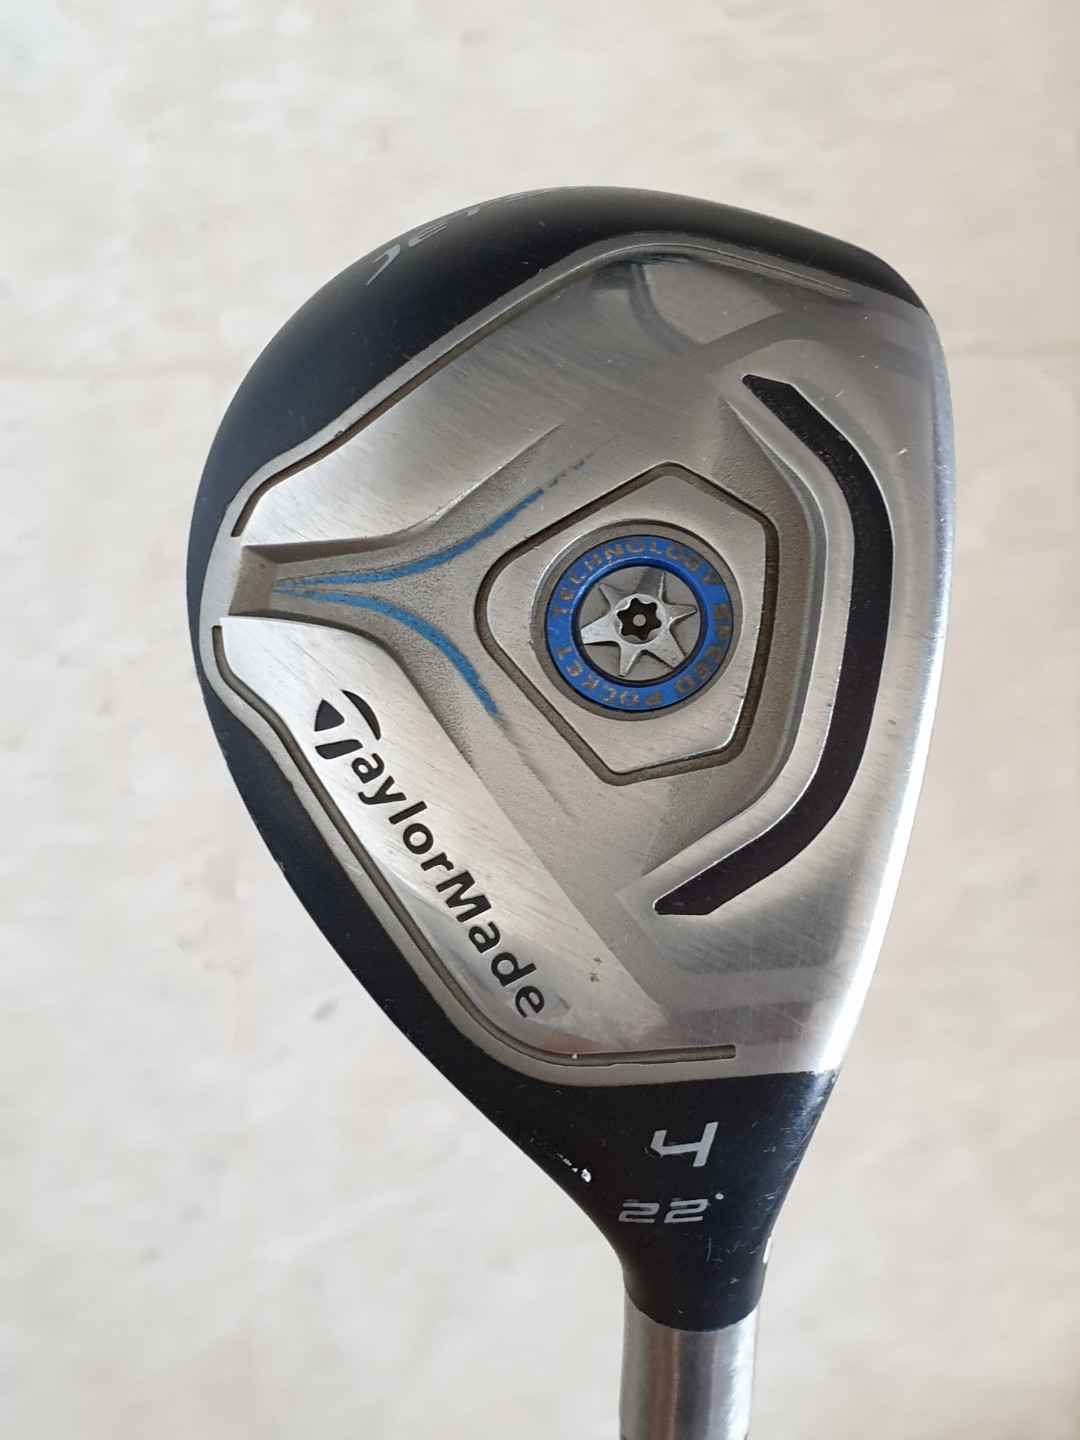 Taylormade #4 hybrid club, Sports, Sports & Games Equipment on Carousell